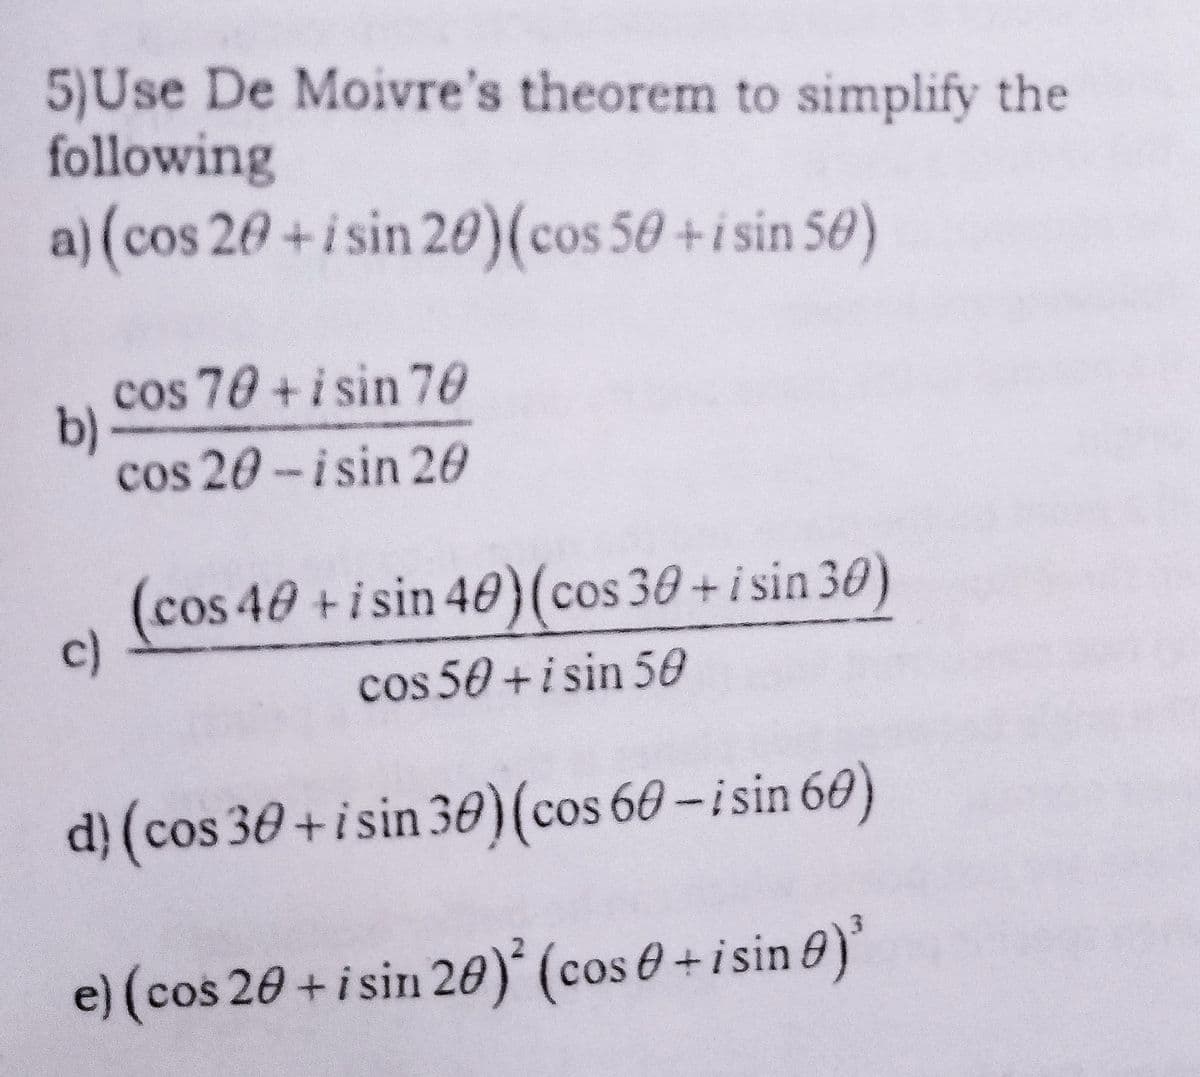 5)Use De Moivre's theorem to simplify the
following
a) (cos 20+i sin 20)(cos 50 +isin 50)
cos 70 + i sin 70
b)
cos 20-isin 20
(cos 40 +isin 40)(cos 30+i sin 30)
c)
cos 50 +i sin 50
d} (cos 30+isin 30)(cos 60-isin 60)
e) (cos 20 +i sin 20)* (cos 0 + i sin @)'
